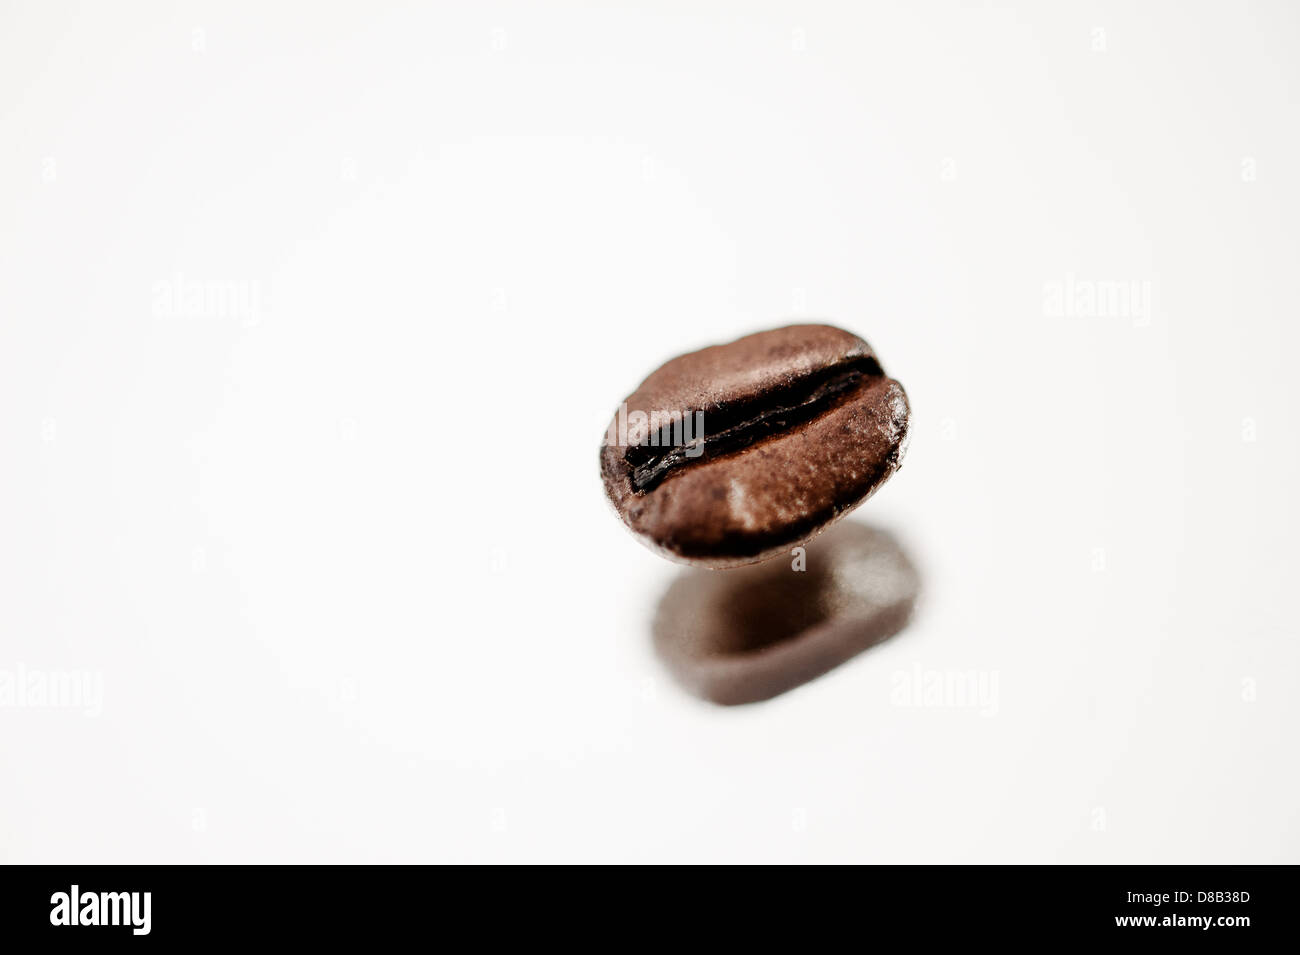 single coffee espresso bean on a reflecting surface Stock Photo